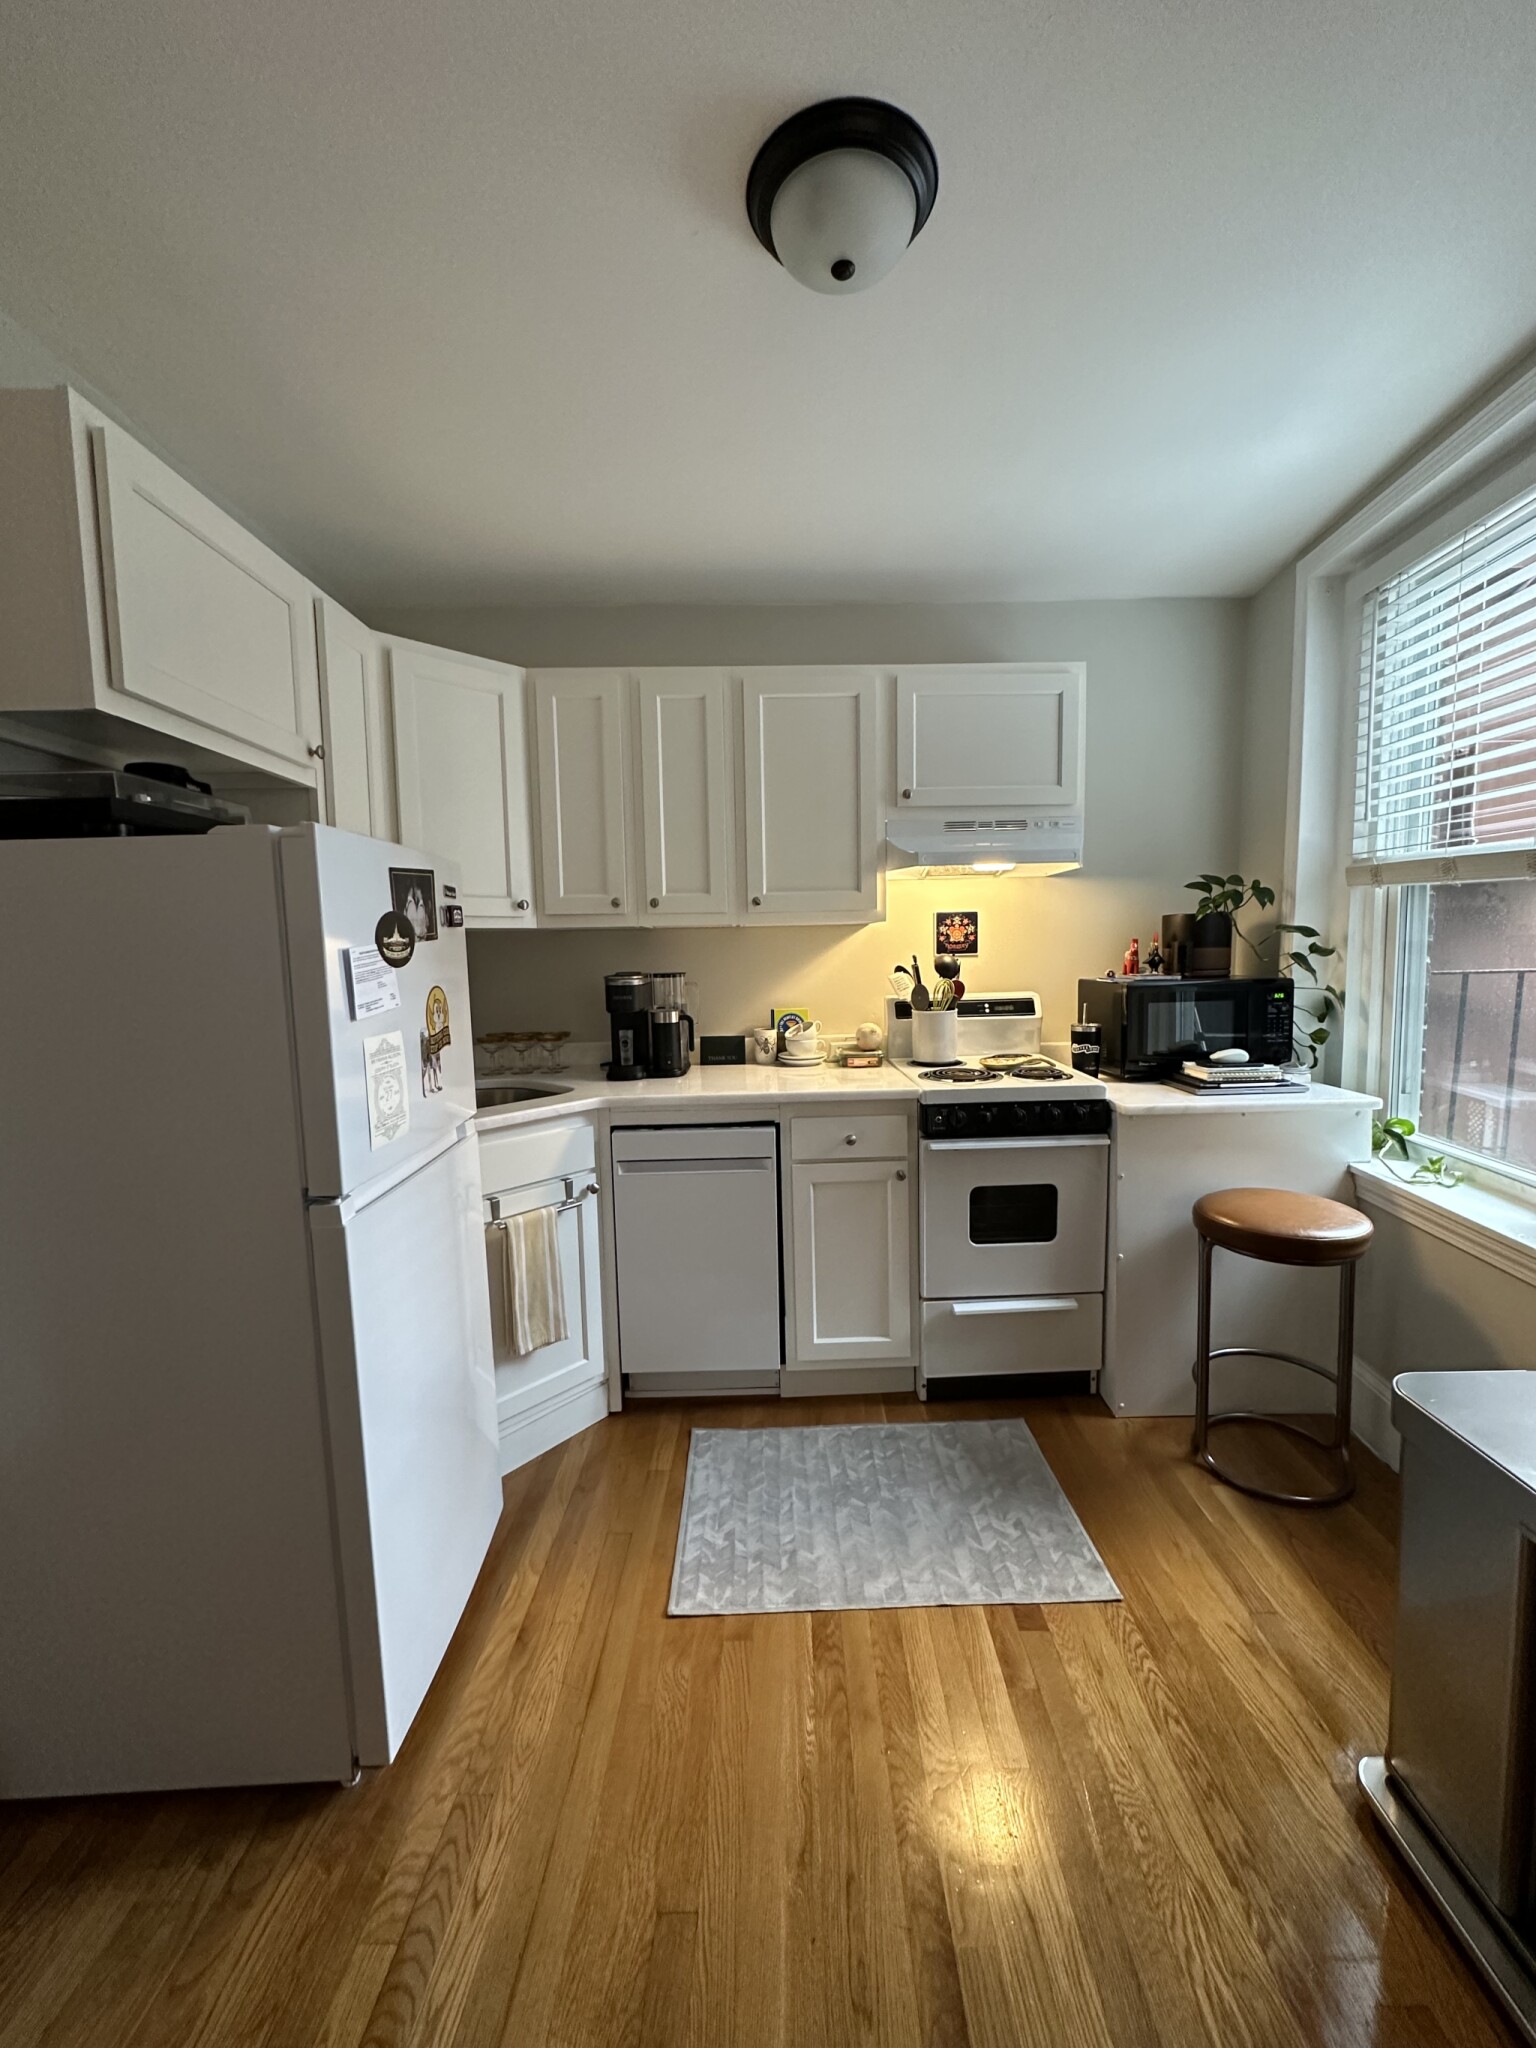 Photos of apartment on Charter St.,Boston MA 02113